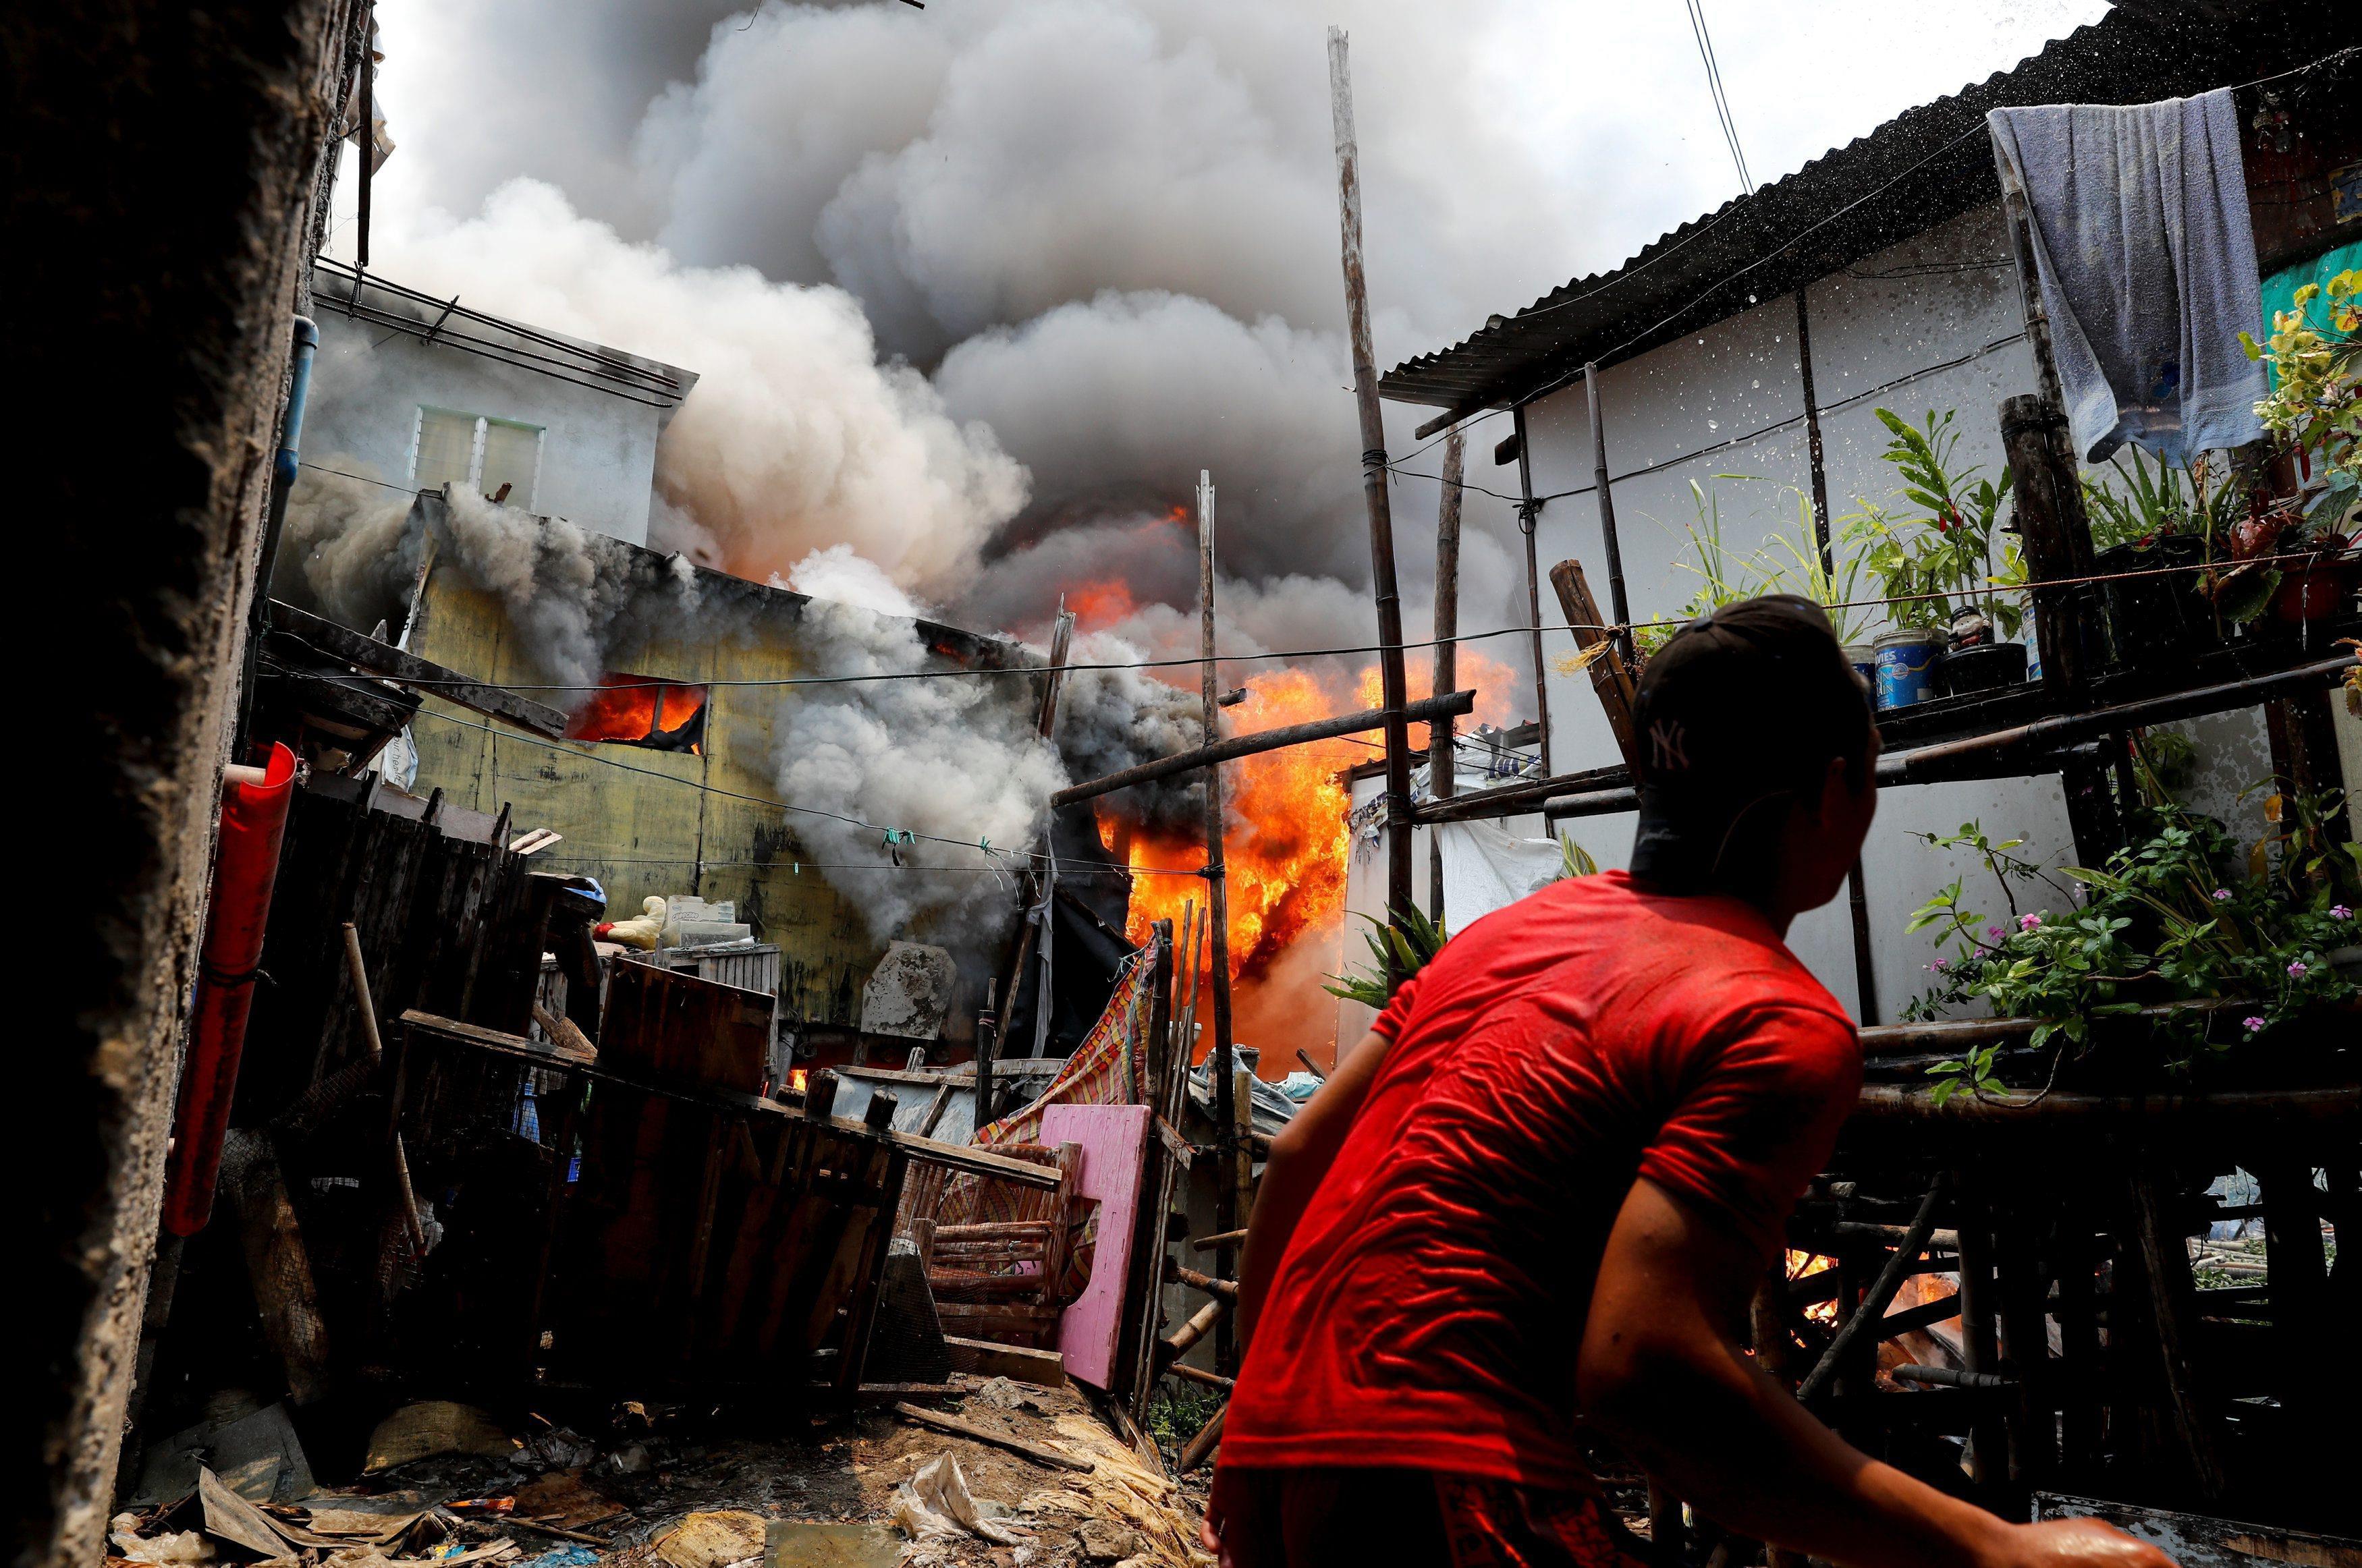 The Wider Image: Manila's slums an endless battle for firefighters